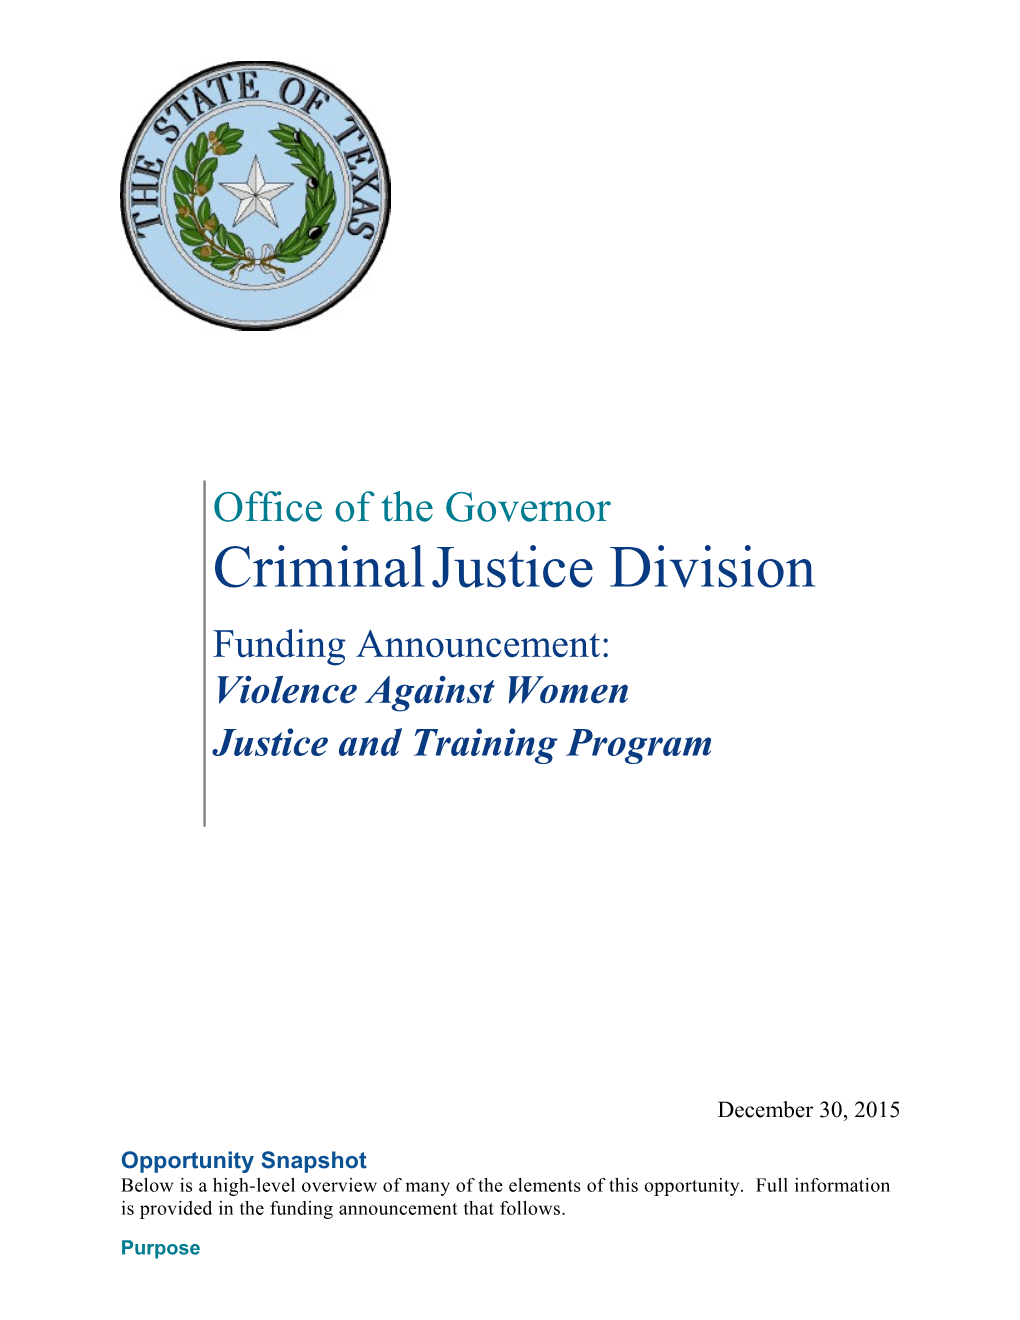 CJD Funding Announcement: Violence Against Women Justice and Training Program